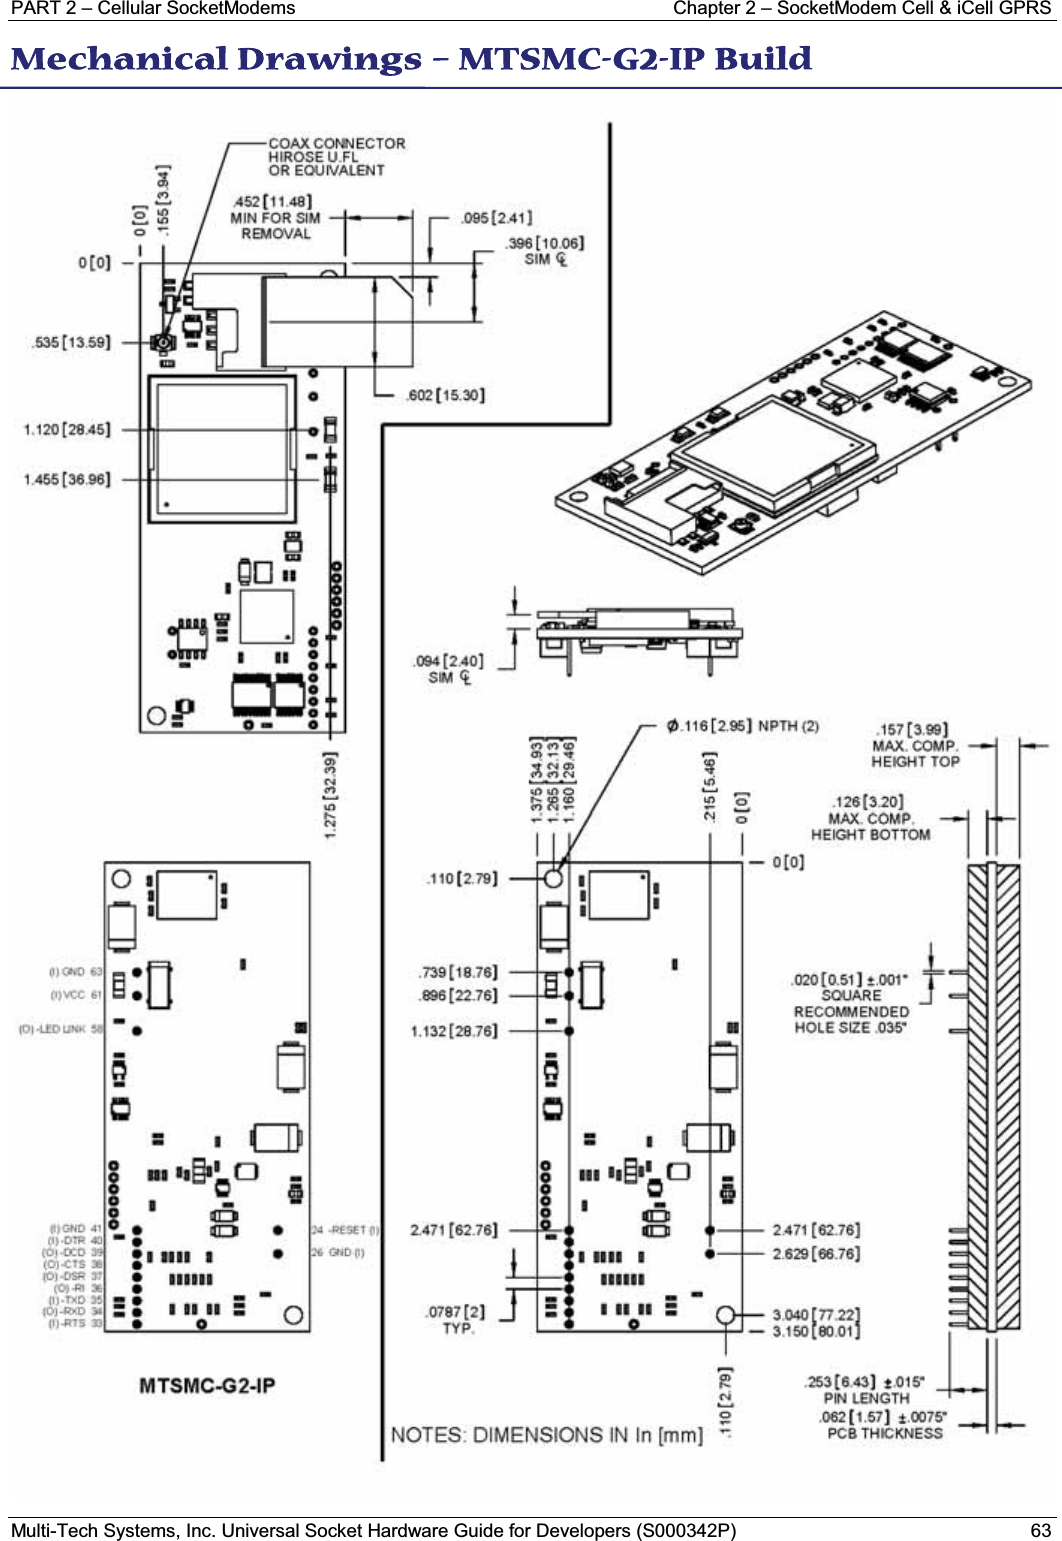 PART 2 – Cellular SocketModems  Chapter 2 – SocketModem Cell &amp; iCell GPRSMulti-Tech Systems, Inc. Universal Socket Hardware Guide for Developers (S000342P) 63MMechanical Drawings – MTSMC-G2-IP Build 